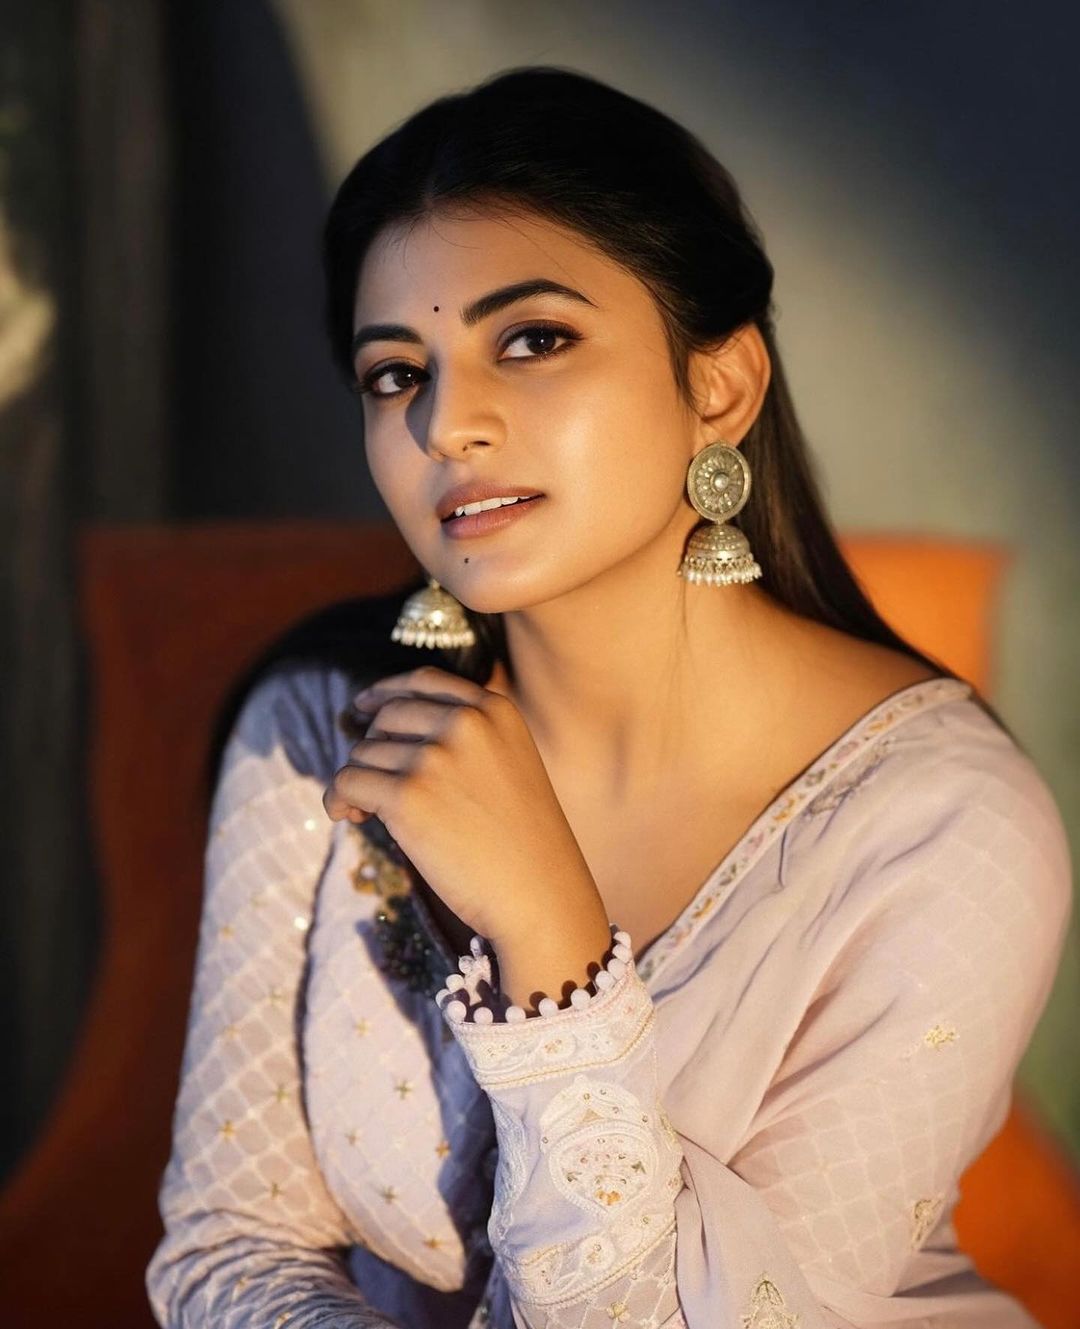 Actress anandhi beauty feast with hot looks-Actress Anandhi, Actressanandhi, Anandhi Photos,Spicy Hot Pics,Images,High Resolution WallPapers Download